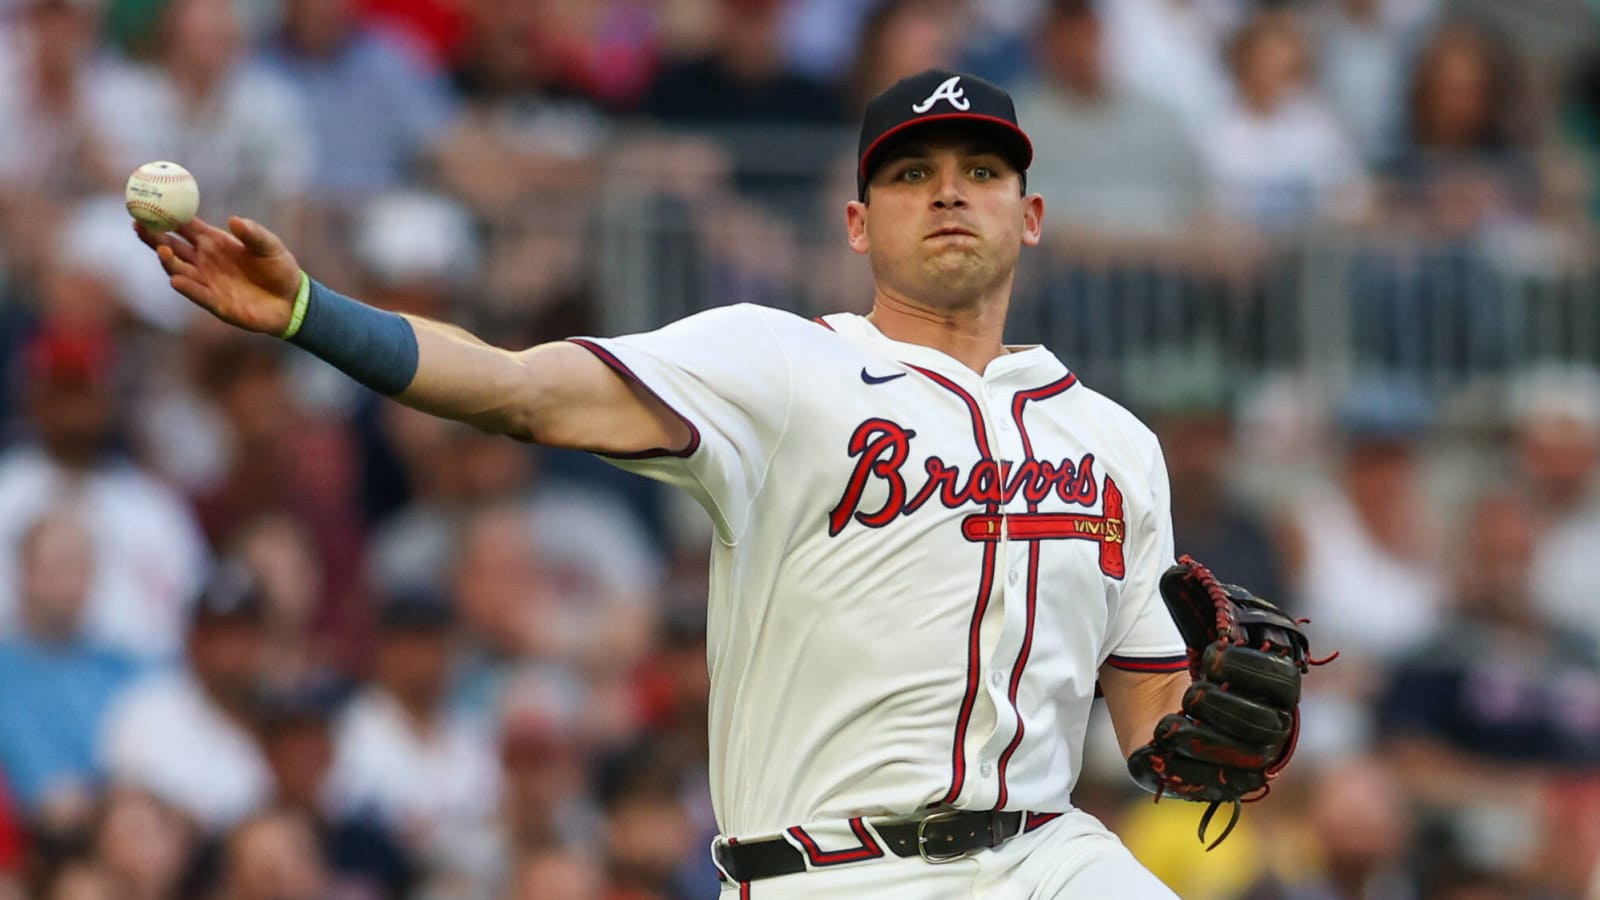 Bleacher Report isn’t buying this early-season Braves trend